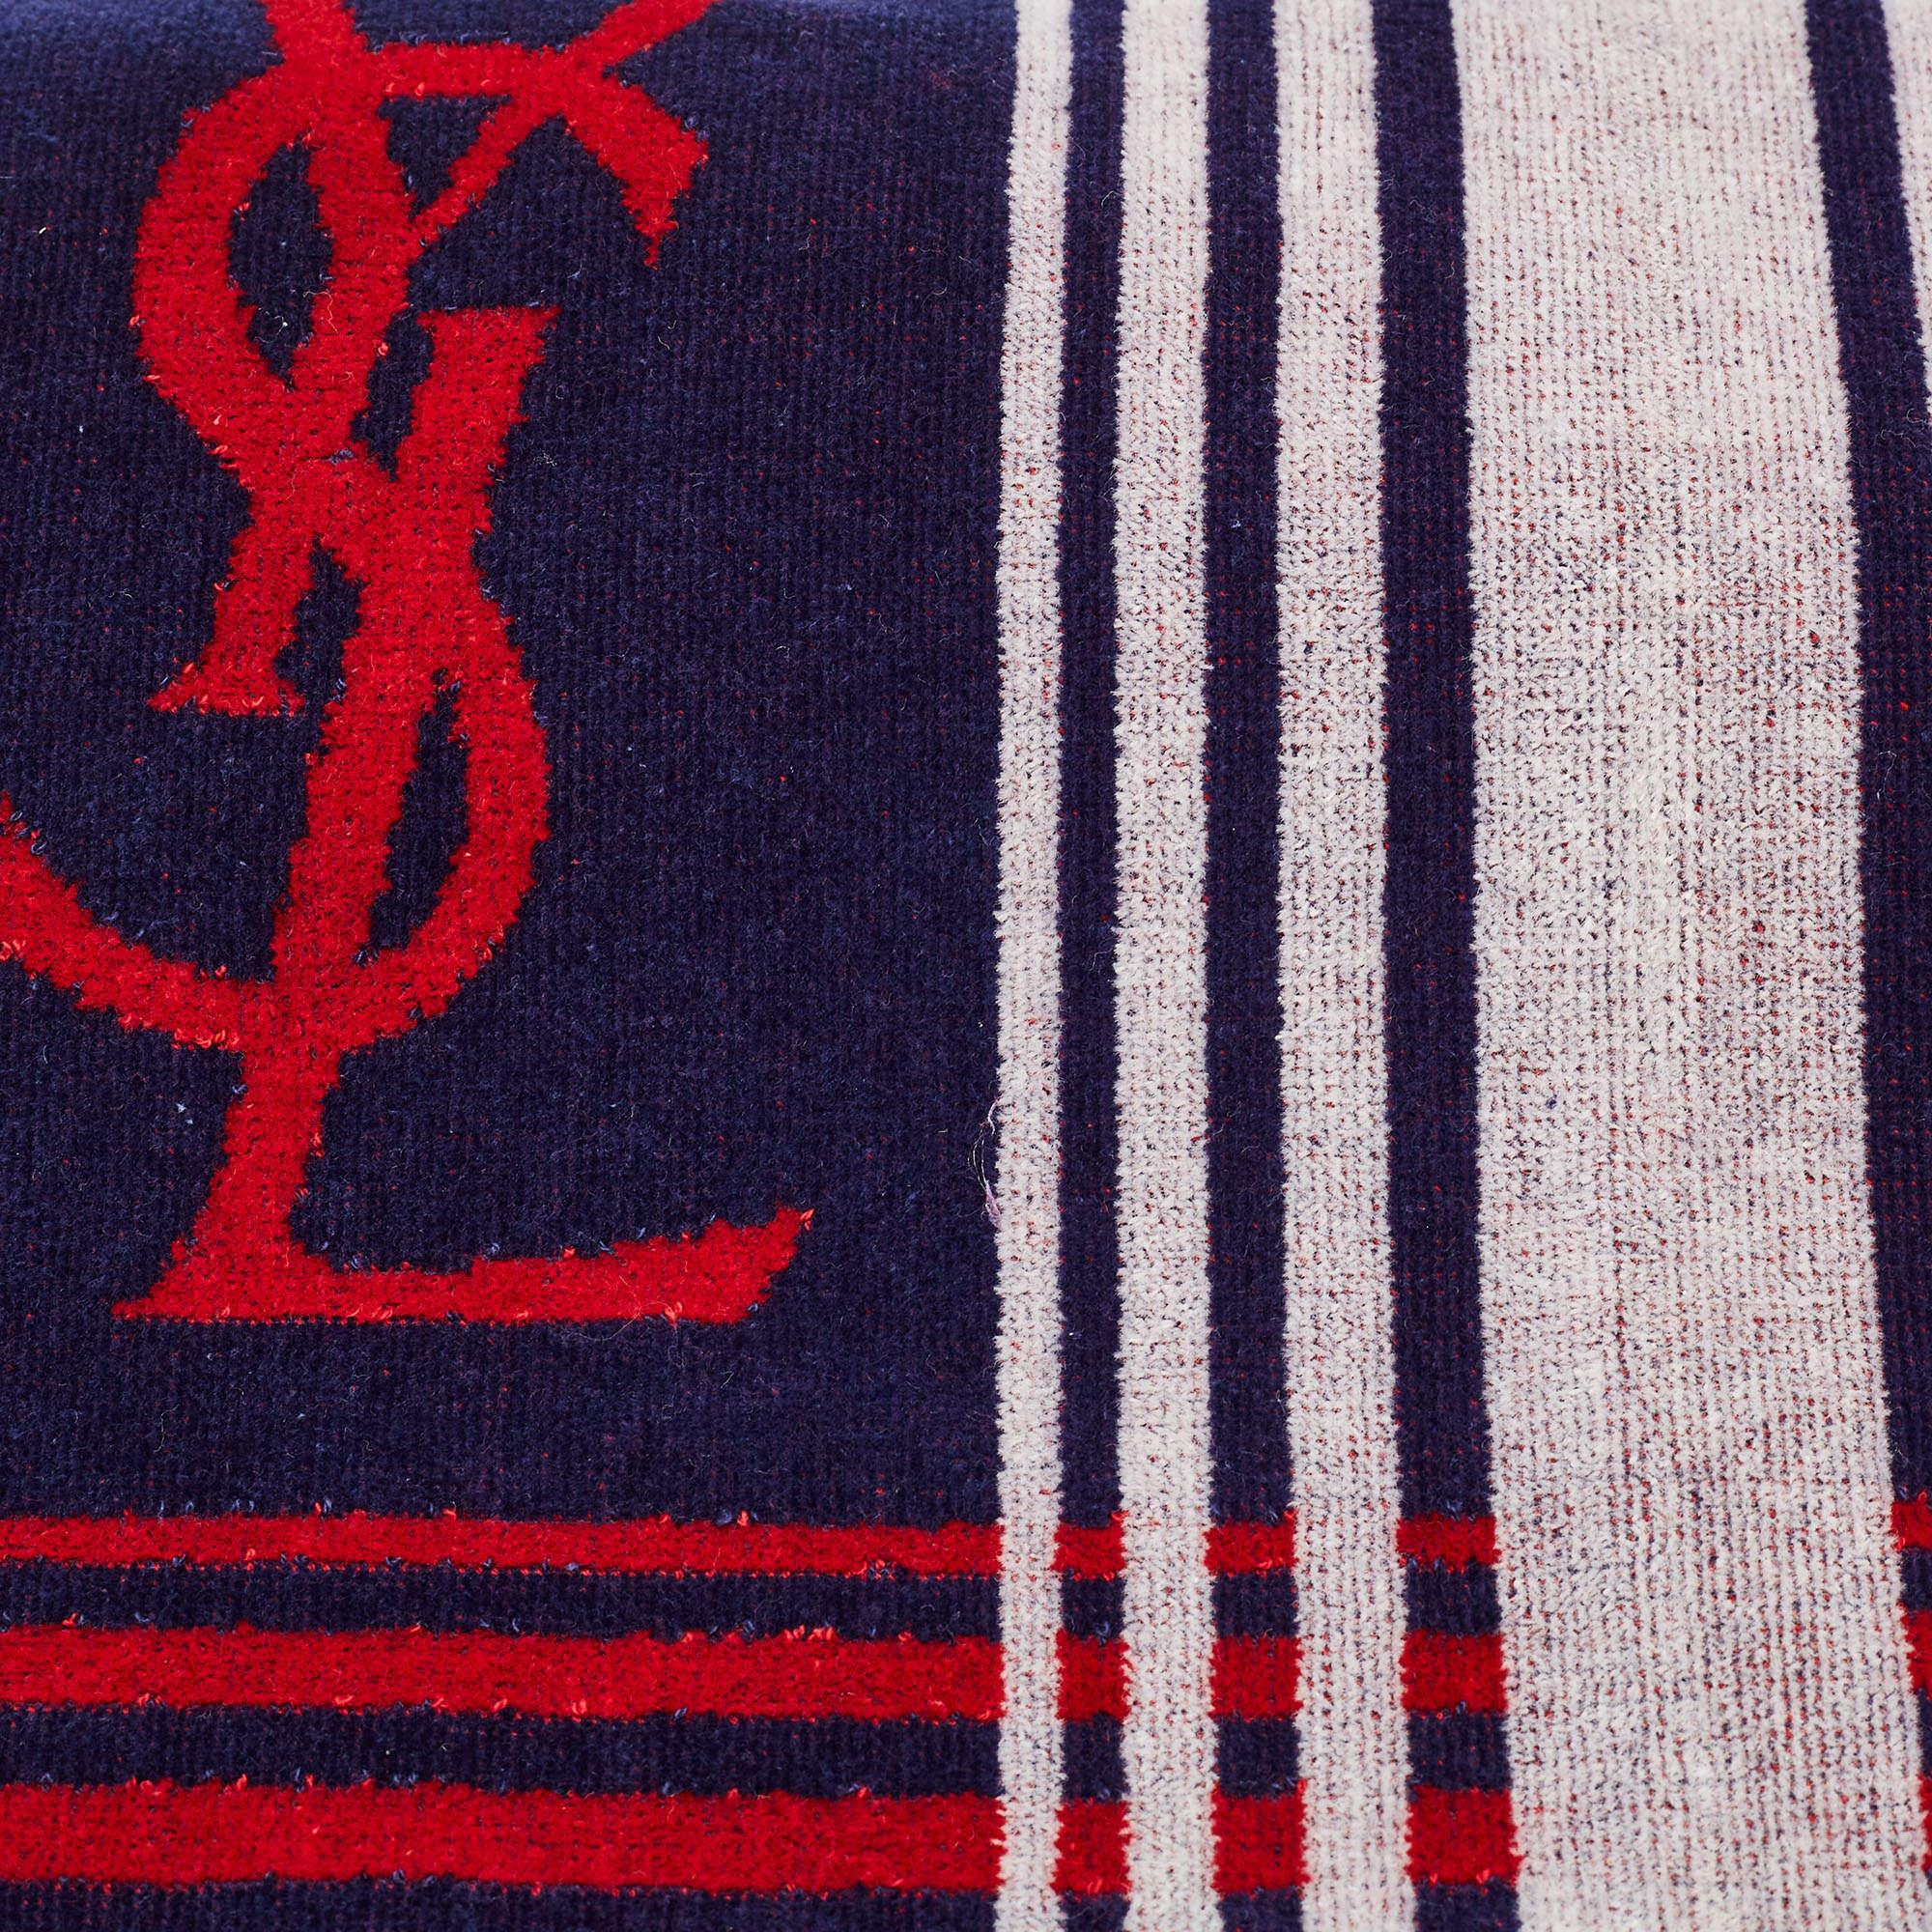 Crafted from quality fabric, this YSL towel carries logo details, hues of red and white, and a soft texture. It is finished impeccably.

Includes: Original Box